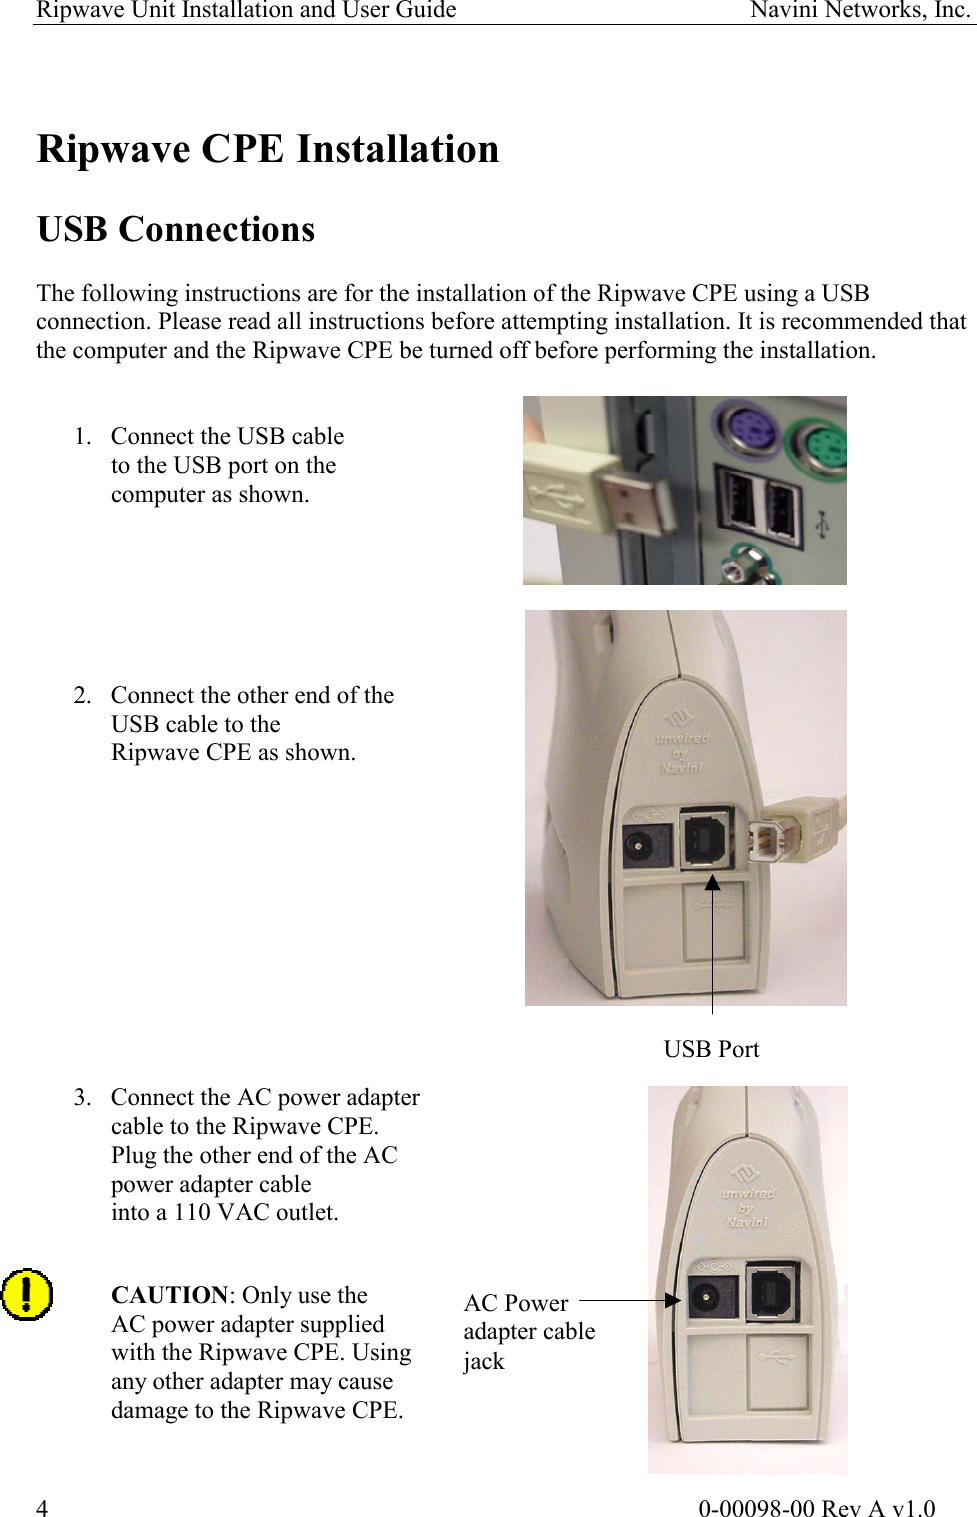 Ripwave Unit Installation and User Guide                                               Navini Networks, Inc.   Ripwave CPE Installation  USB Connections  The following instructions are for the installation of the Ripwave CPE using a USB connection. Please read all instructions before attempting installation. It is recommended that the computer and the Ripwave CPE be turned off before performing the installation.    1.  Connect the USB cable  to the USB port on the  computer as shown.        2.  Connect the other end of the  USB cable to the  Ripwave CPE as shown.           USB Port 3.  Connect the AC power adapter  cable to the Ripwave CPE.  Plug the other end of the AC  power adapter cable  into a 110 VAC outlet. AC Power  adapter cable  jack  CAUTION: Only use the AC power adapter supplied  with the Ripwave CPE. Using any other adapter may cause damage to the Ripwave CPE.                                                                                                      0-00098-00 Rev A v1.0 4